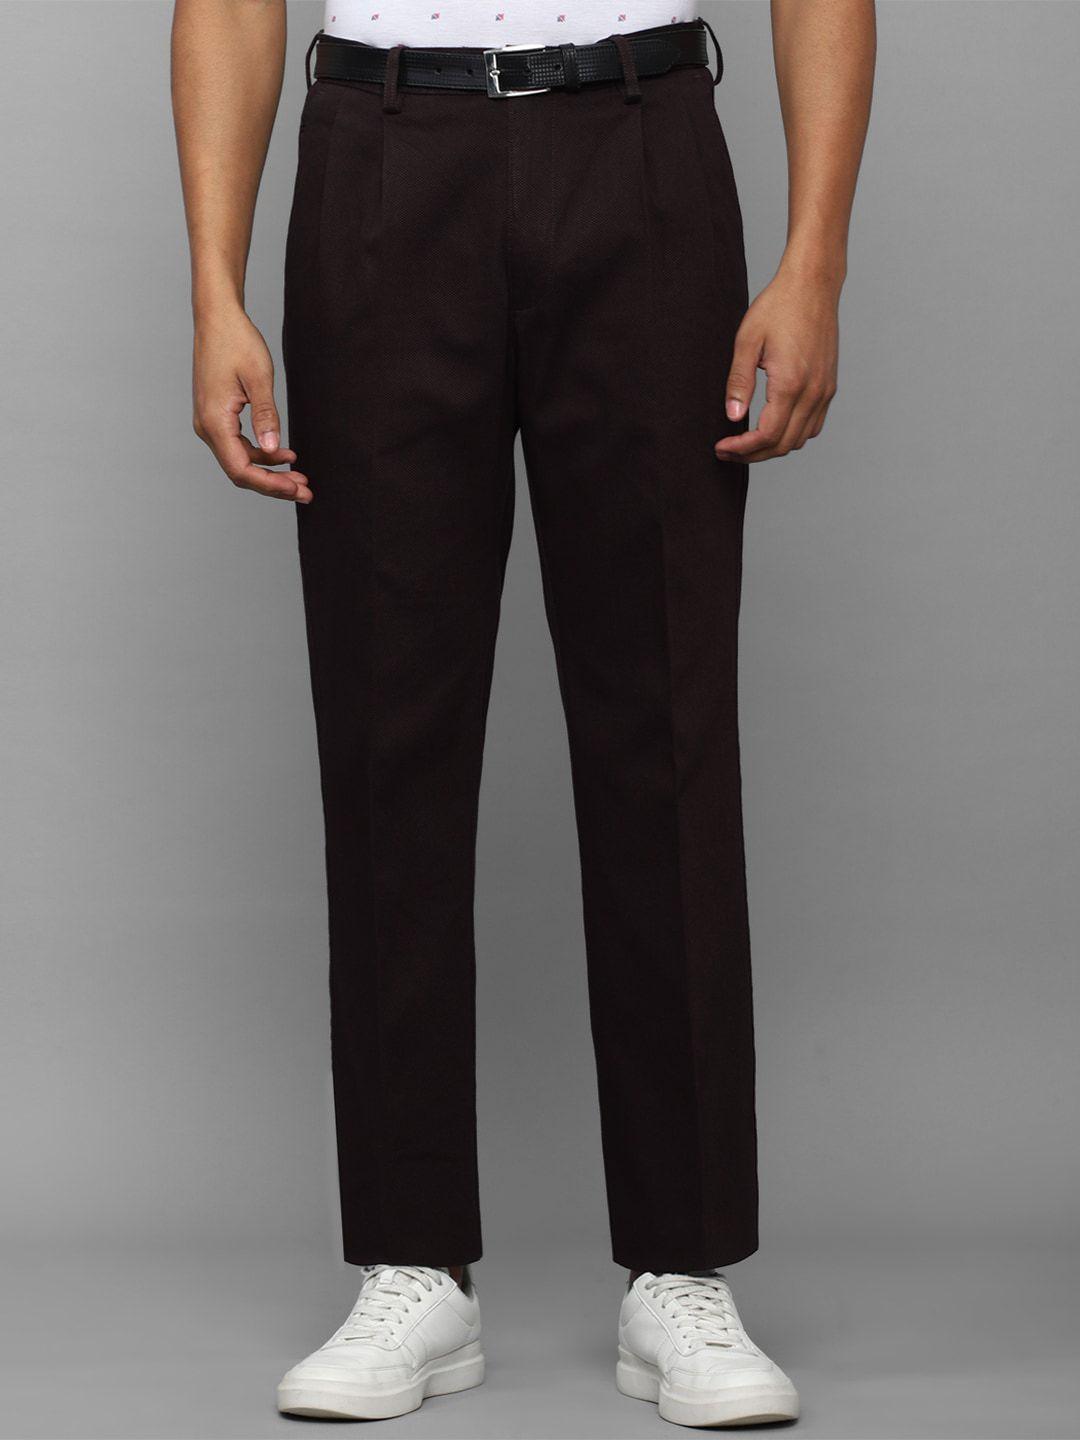 allen solly men textured pleated trousers